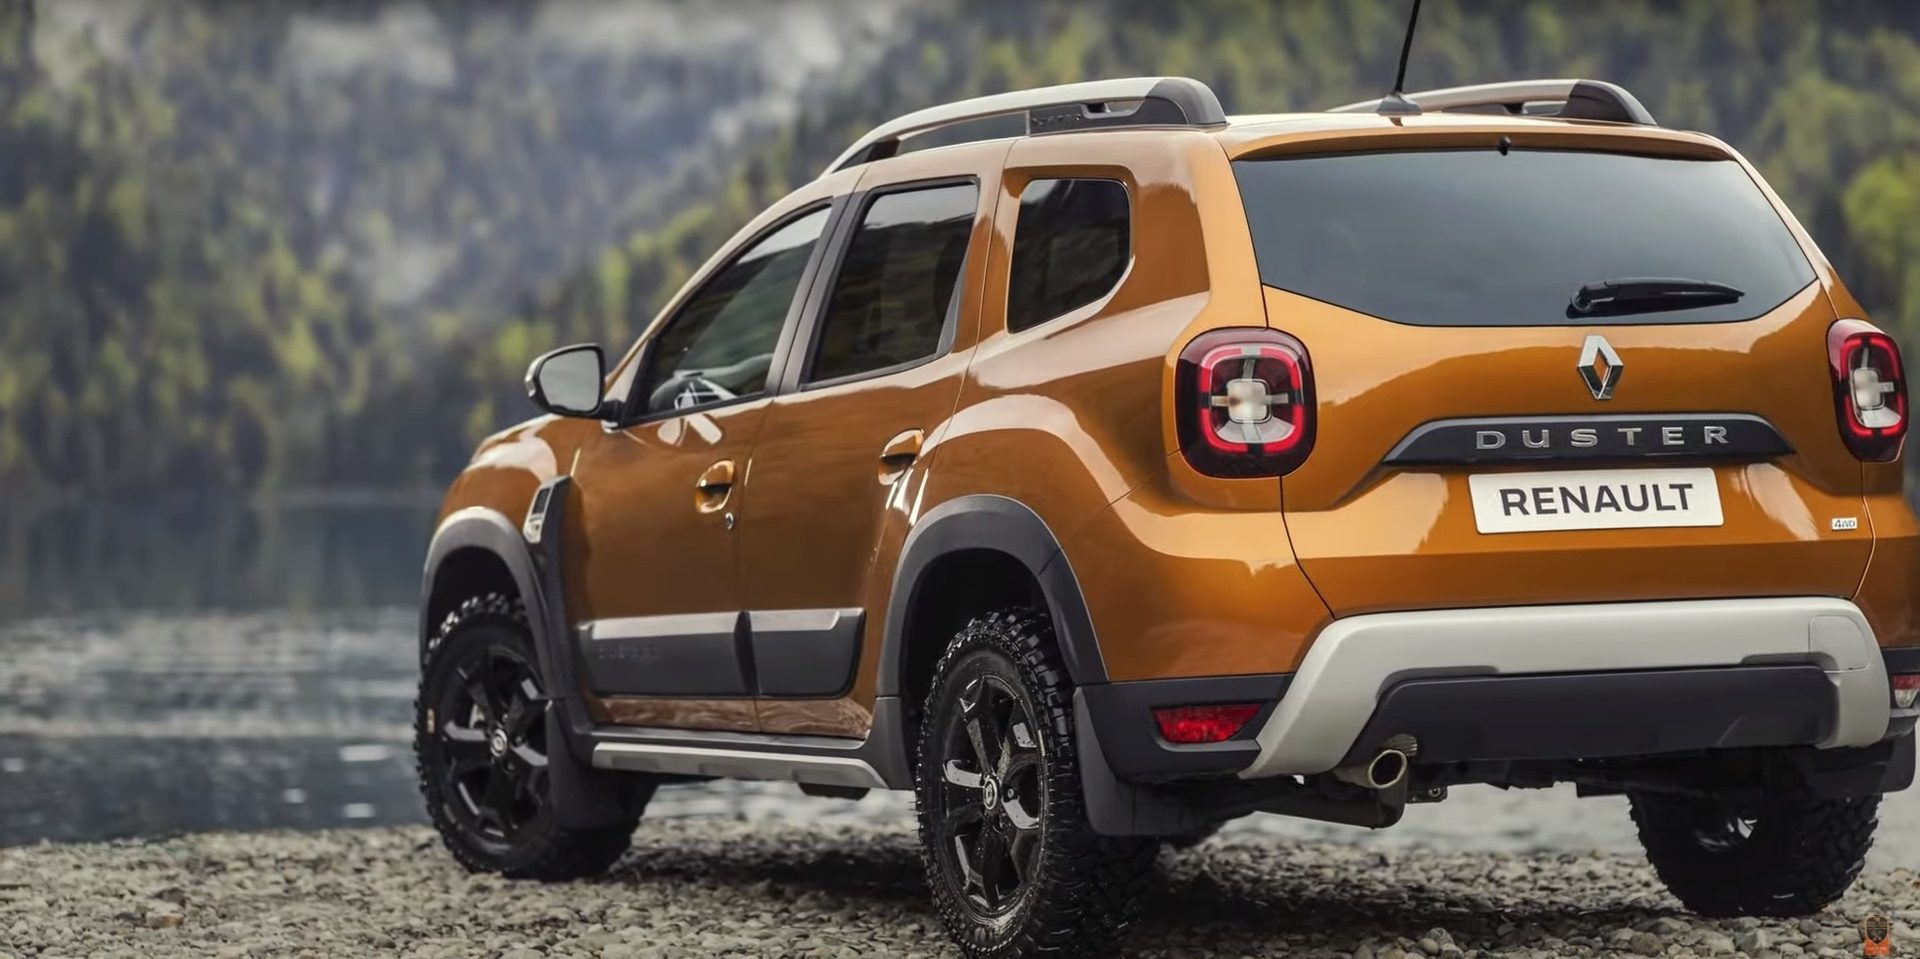 The New Renault Duster for Russia - Nortec MT-540 Review